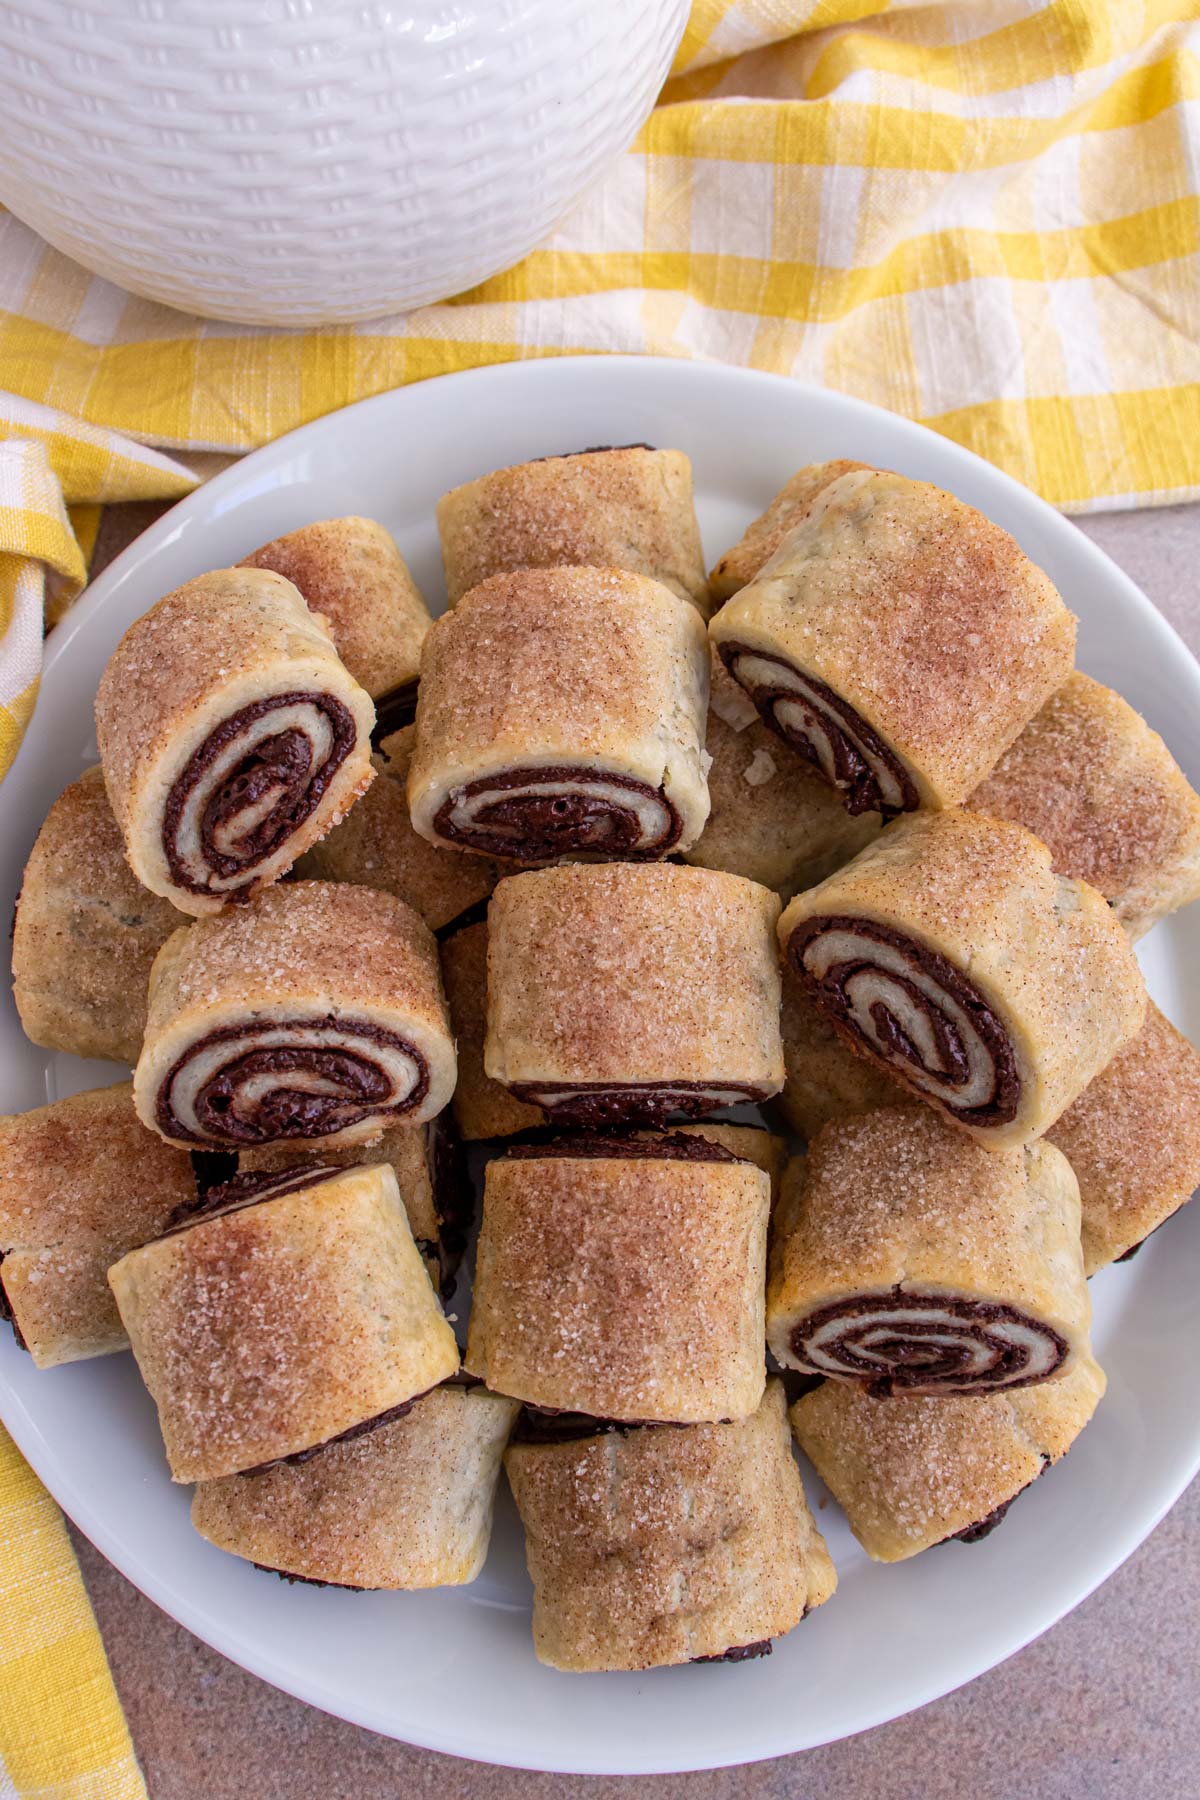 A round platter of chocolate rugelach pastries alongside a yellow gingham towel.